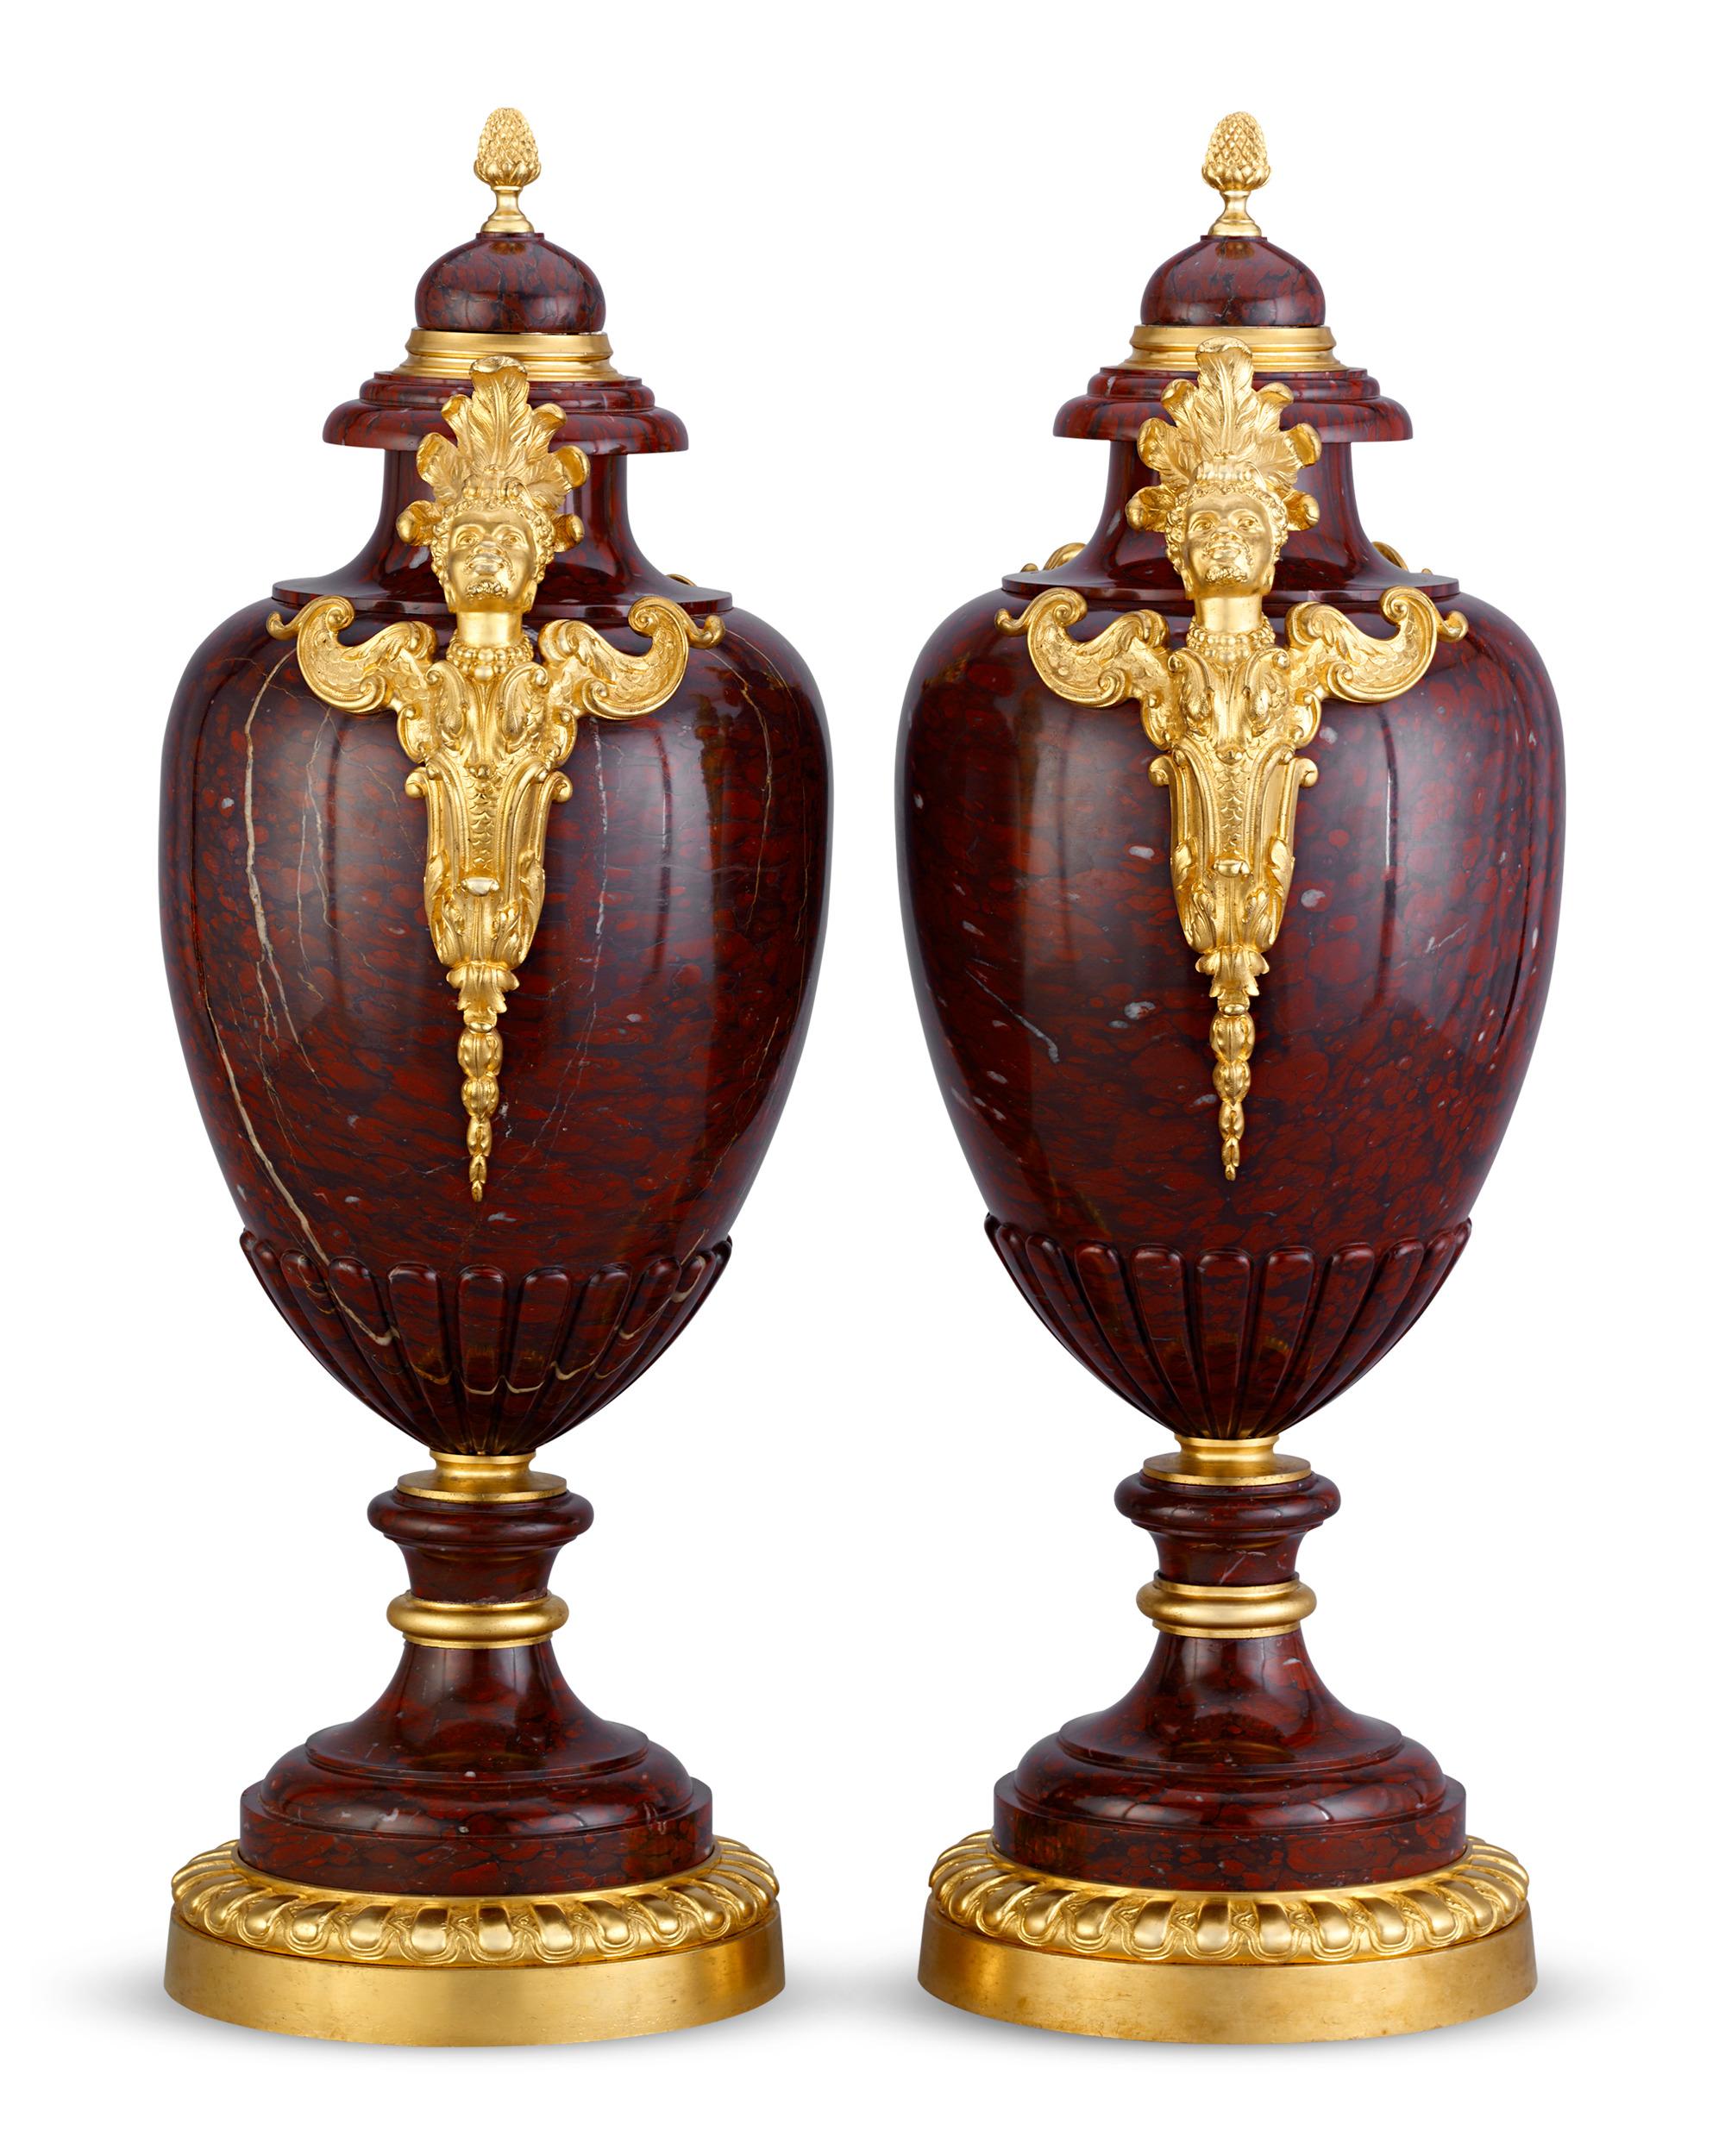 Fashioned of rare and precious griotte rouge marble and gilt bronze, these vases embody neoclassical elegance at its finest. Borrowing its forms and motifs derived from classical Roman and Greek antiquity, the gilt bronze contrasts beautifully with